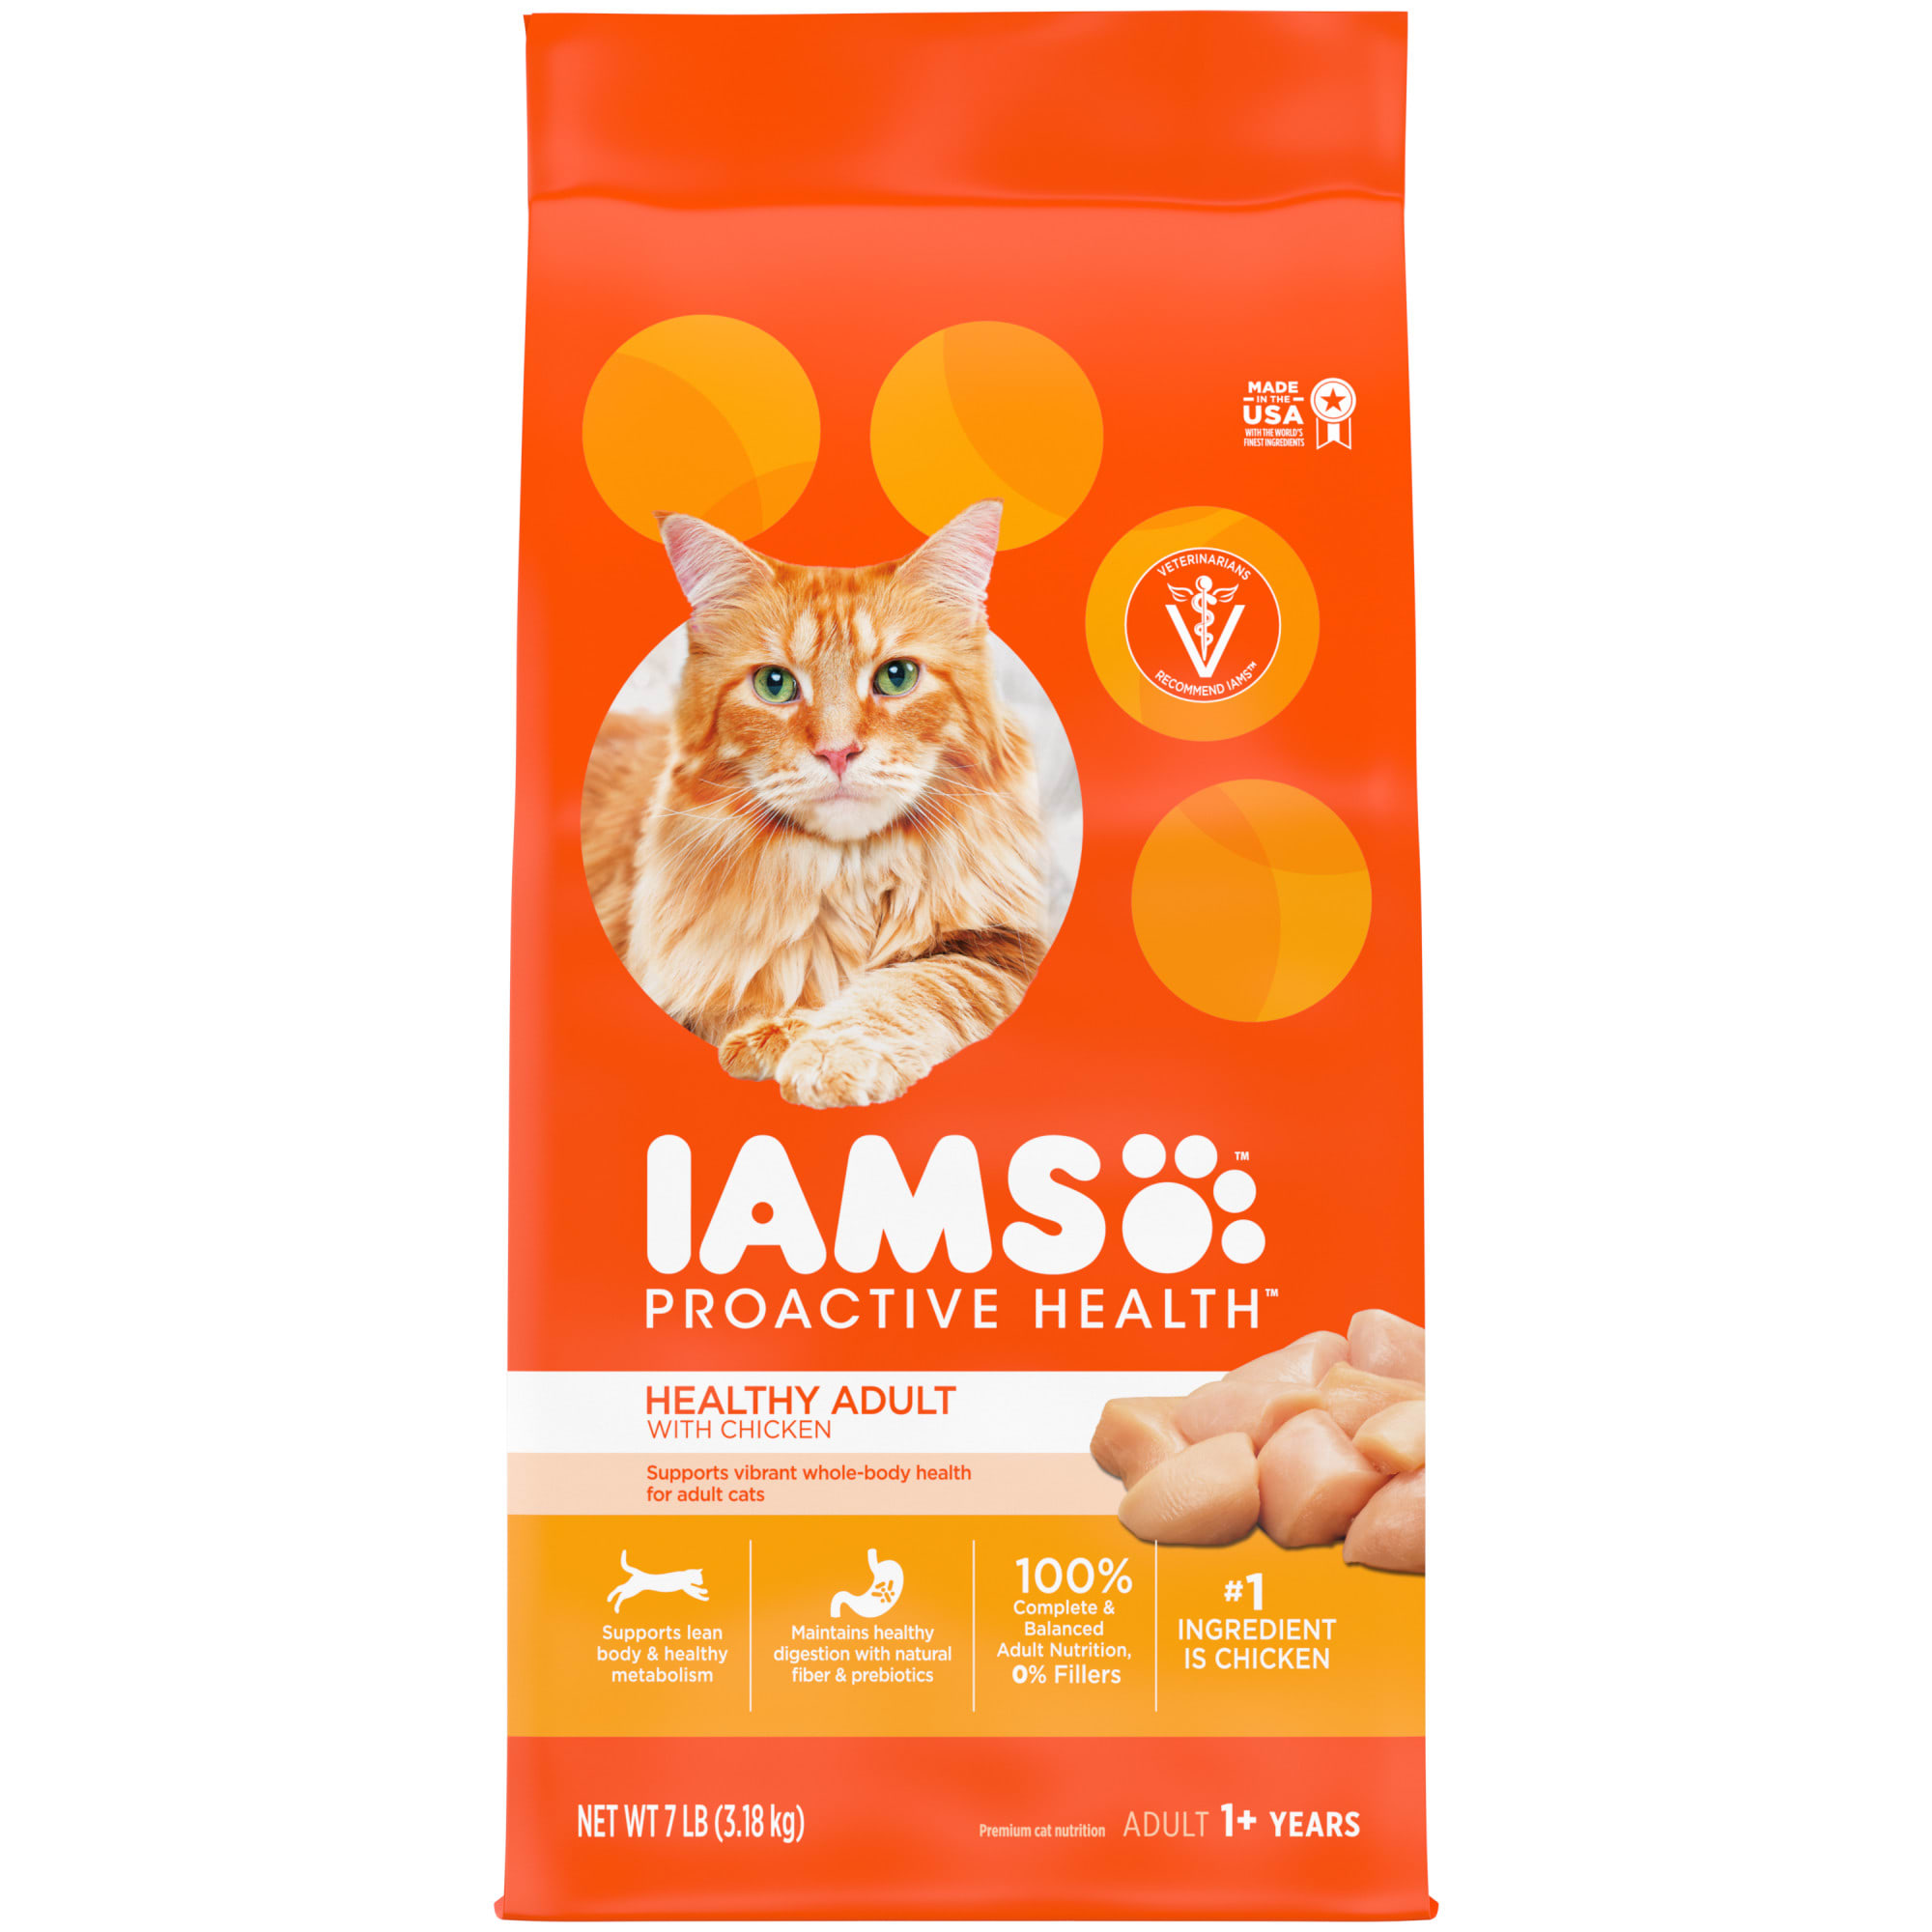 UPC 019014712571 product image for Iams ProActive Health with Chicken Adult Dry Cat Food, 7 lbs. | upcitemdb.com